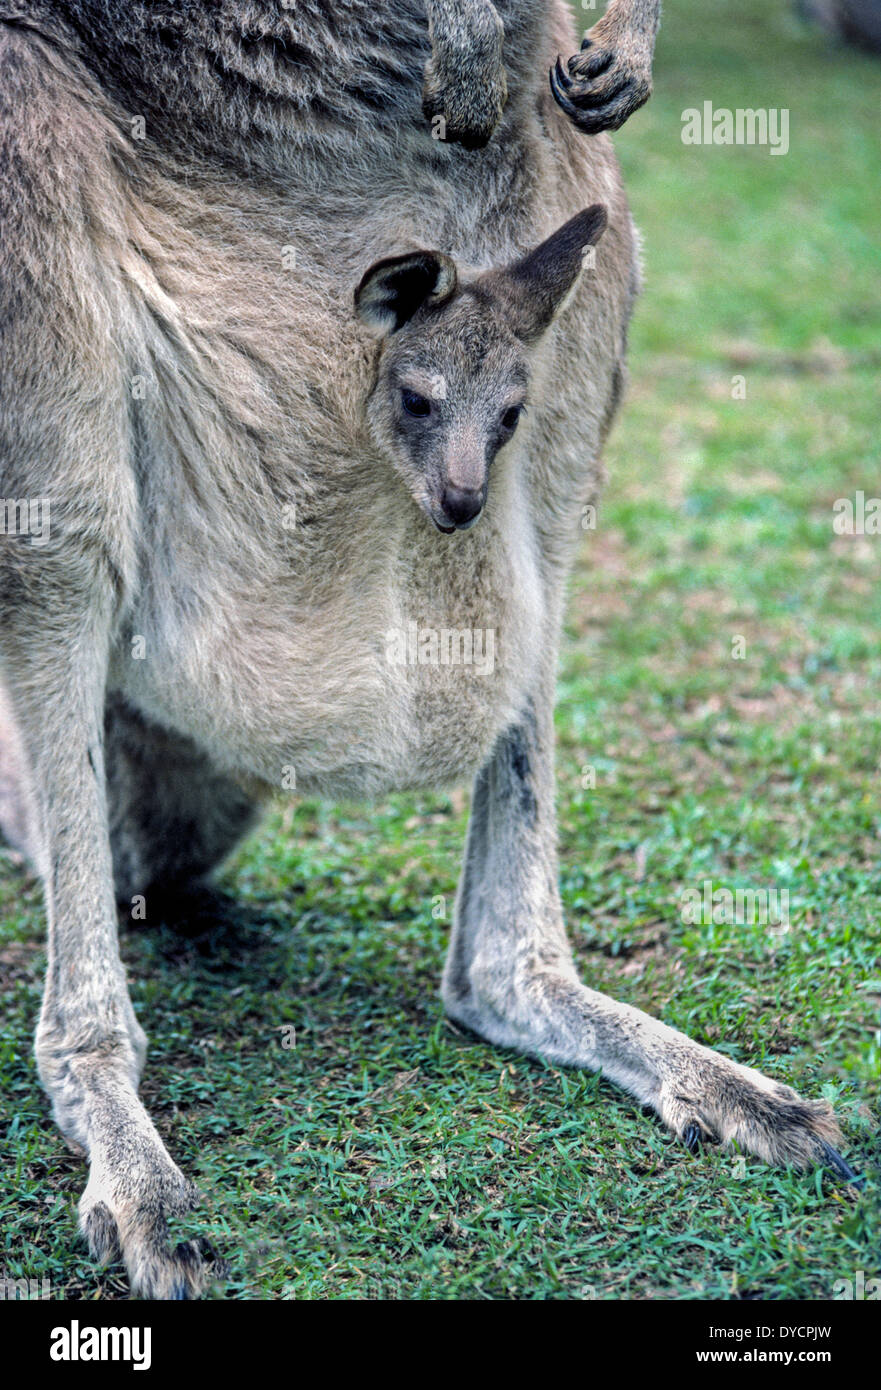 A baby Australian kangaroo pokes its head out of its mother's pouch, where the joey is nourished and protected until it matures. Stock Photo